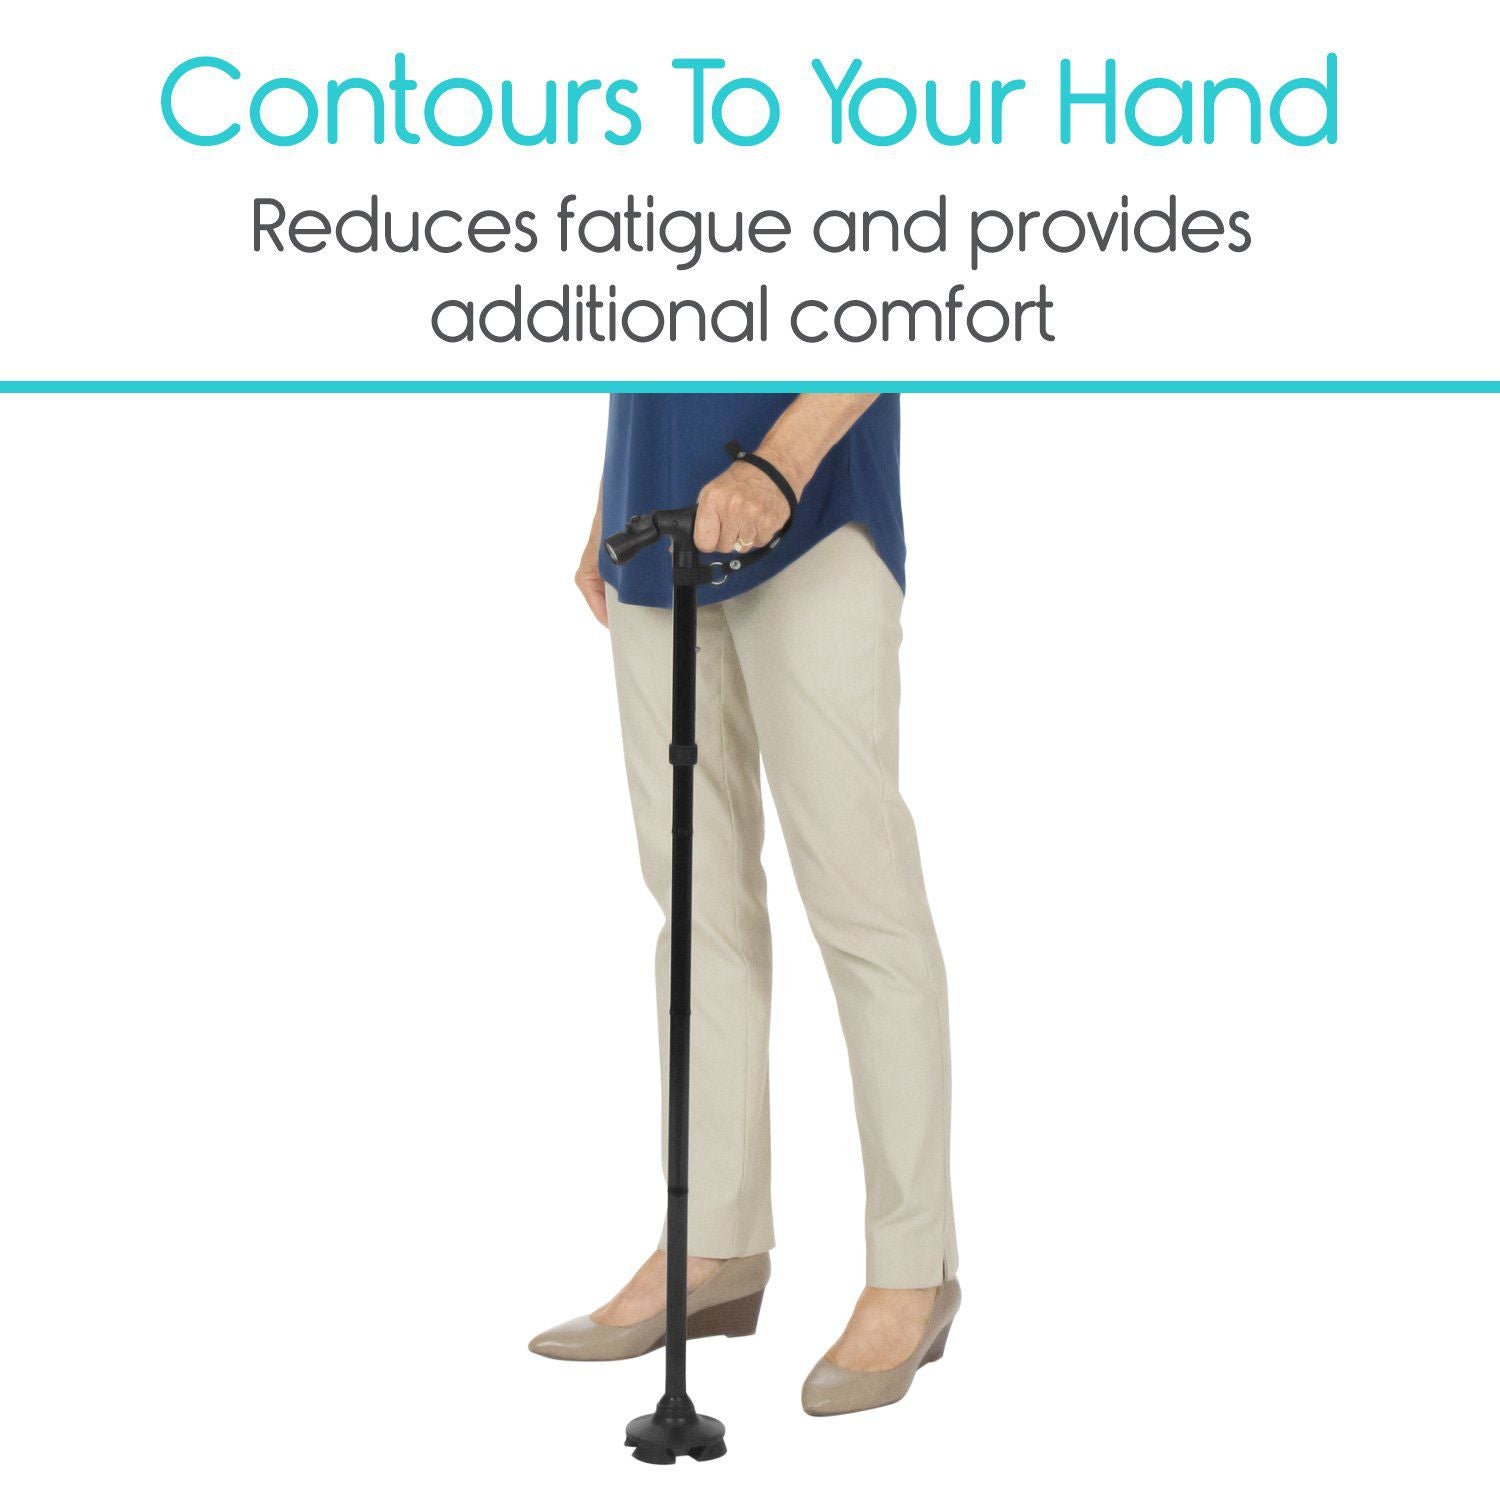 The Folding Cane by Vive 